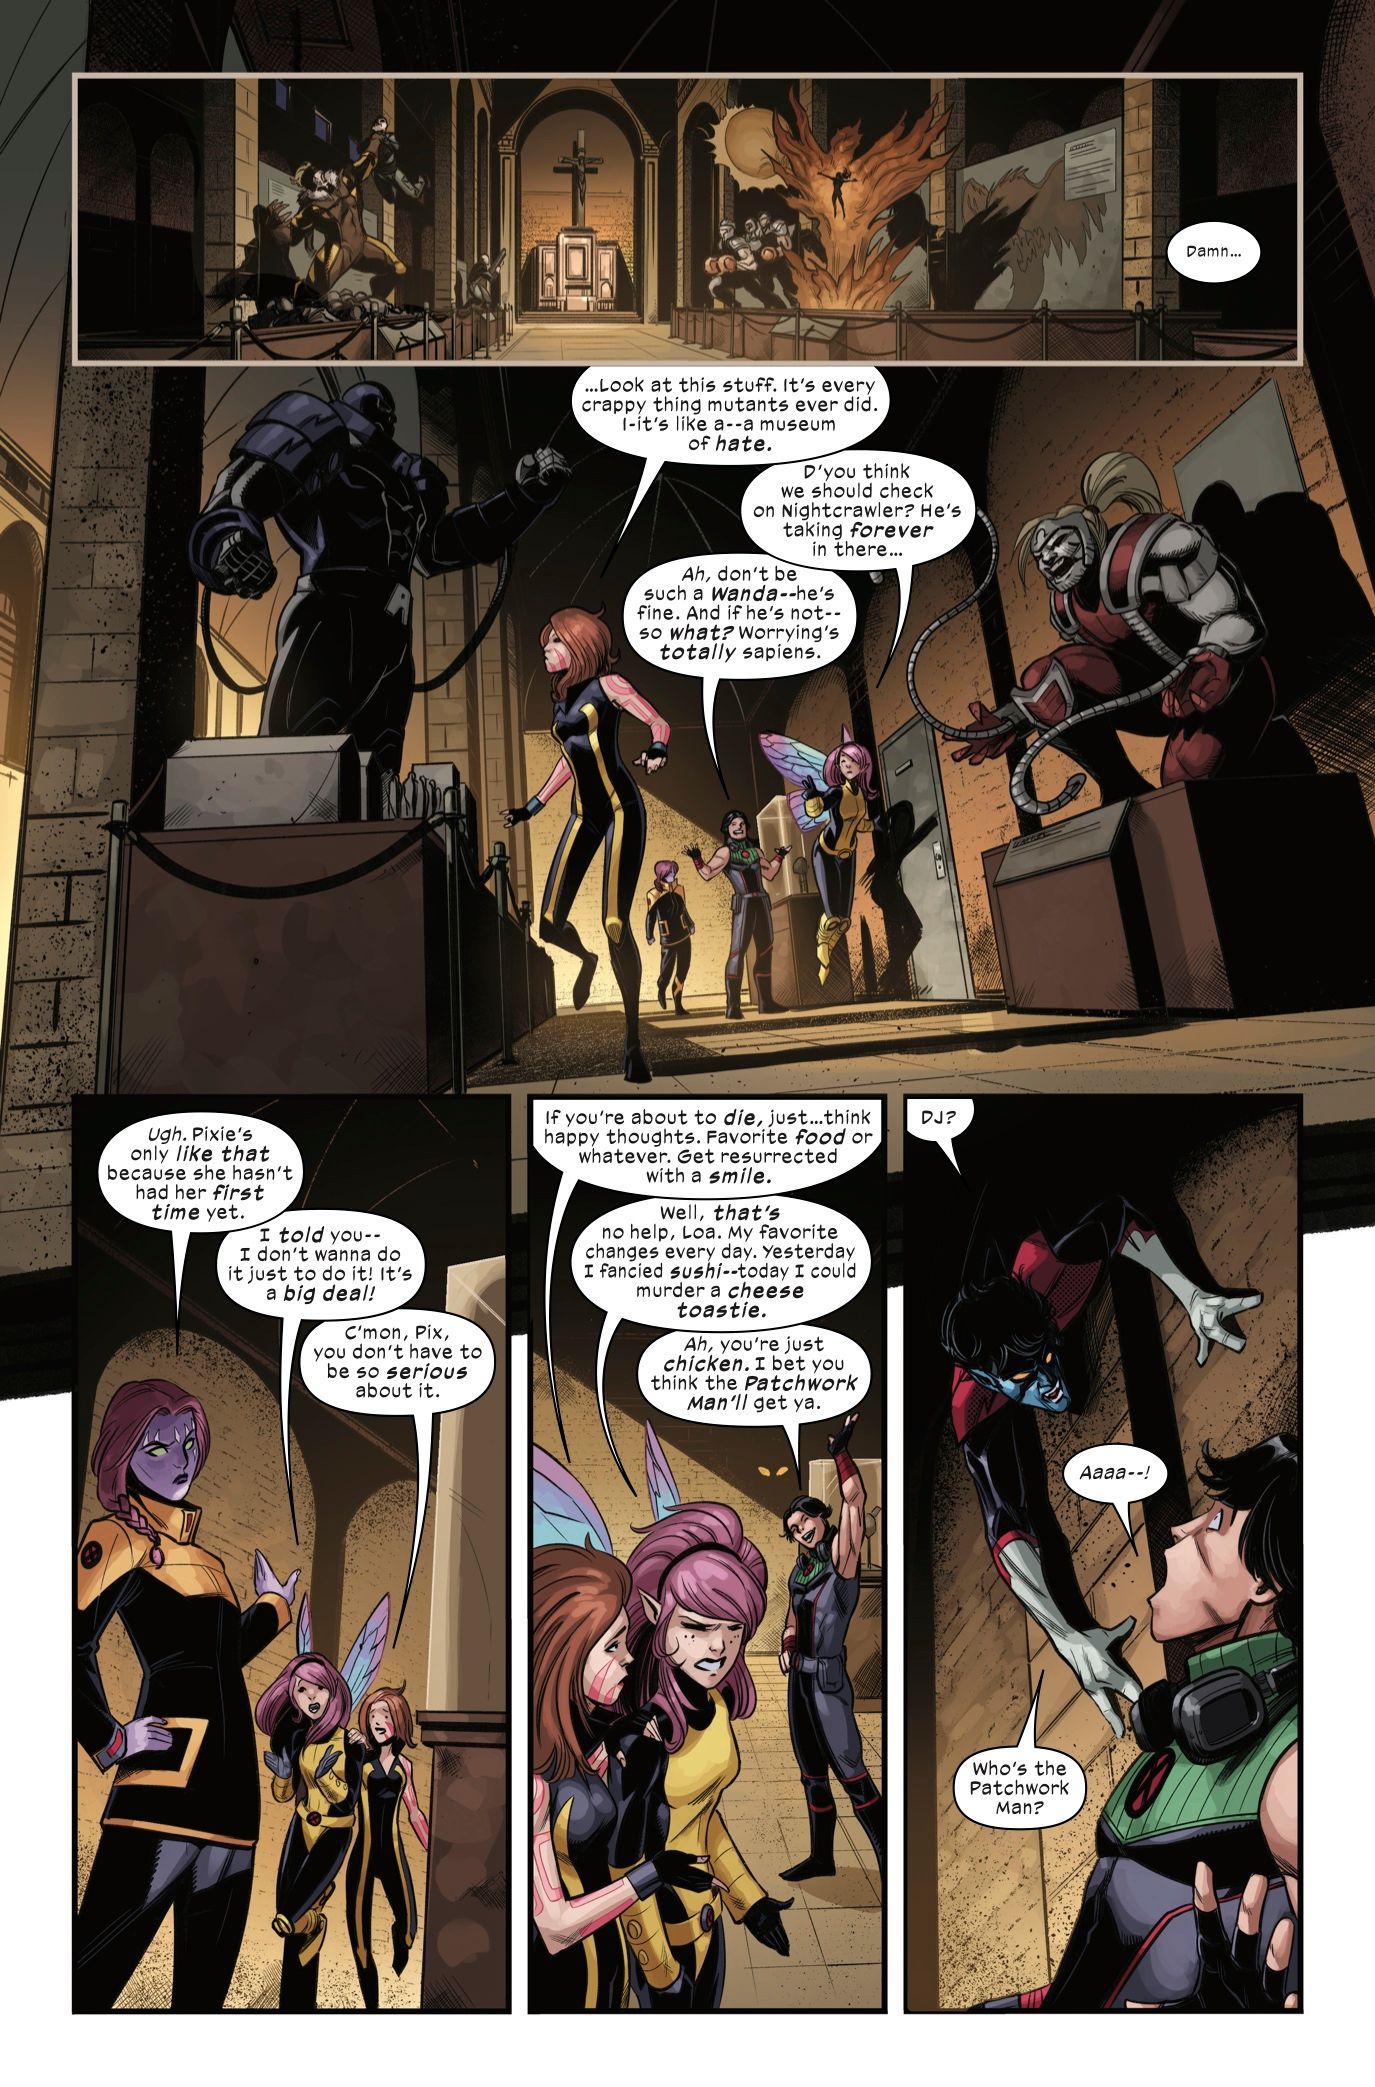 Way-Of-X-1-Preview-Page-4